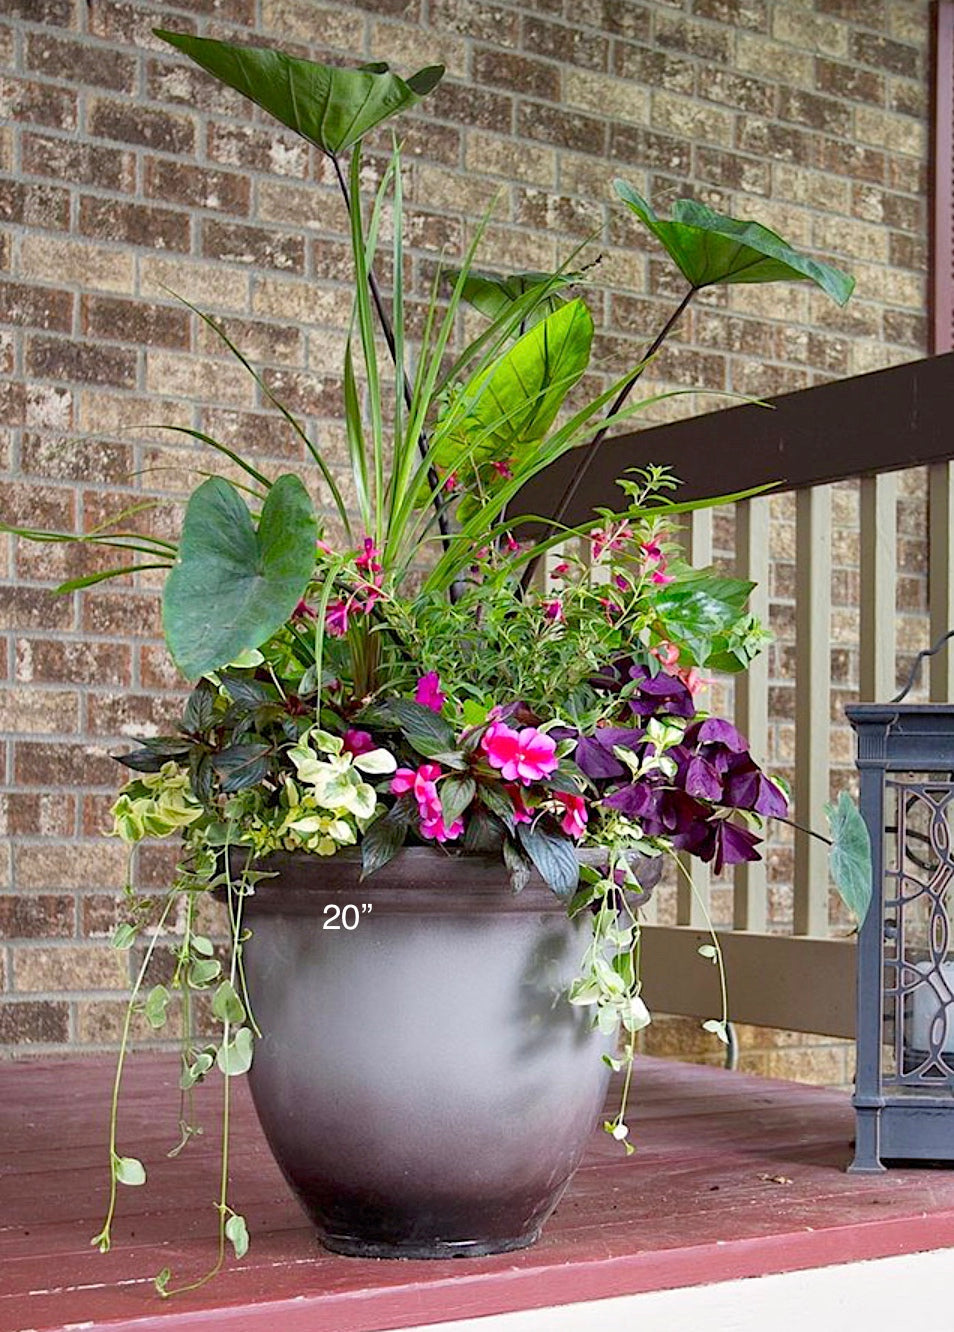 Planter Delivery Subscription - Use Your Own Container Auto renew-Simple and Grand-Round-9" Round (9" Top x 6.25" Tall x 6.75" Bottom)-Full Sun-Simple and Grand